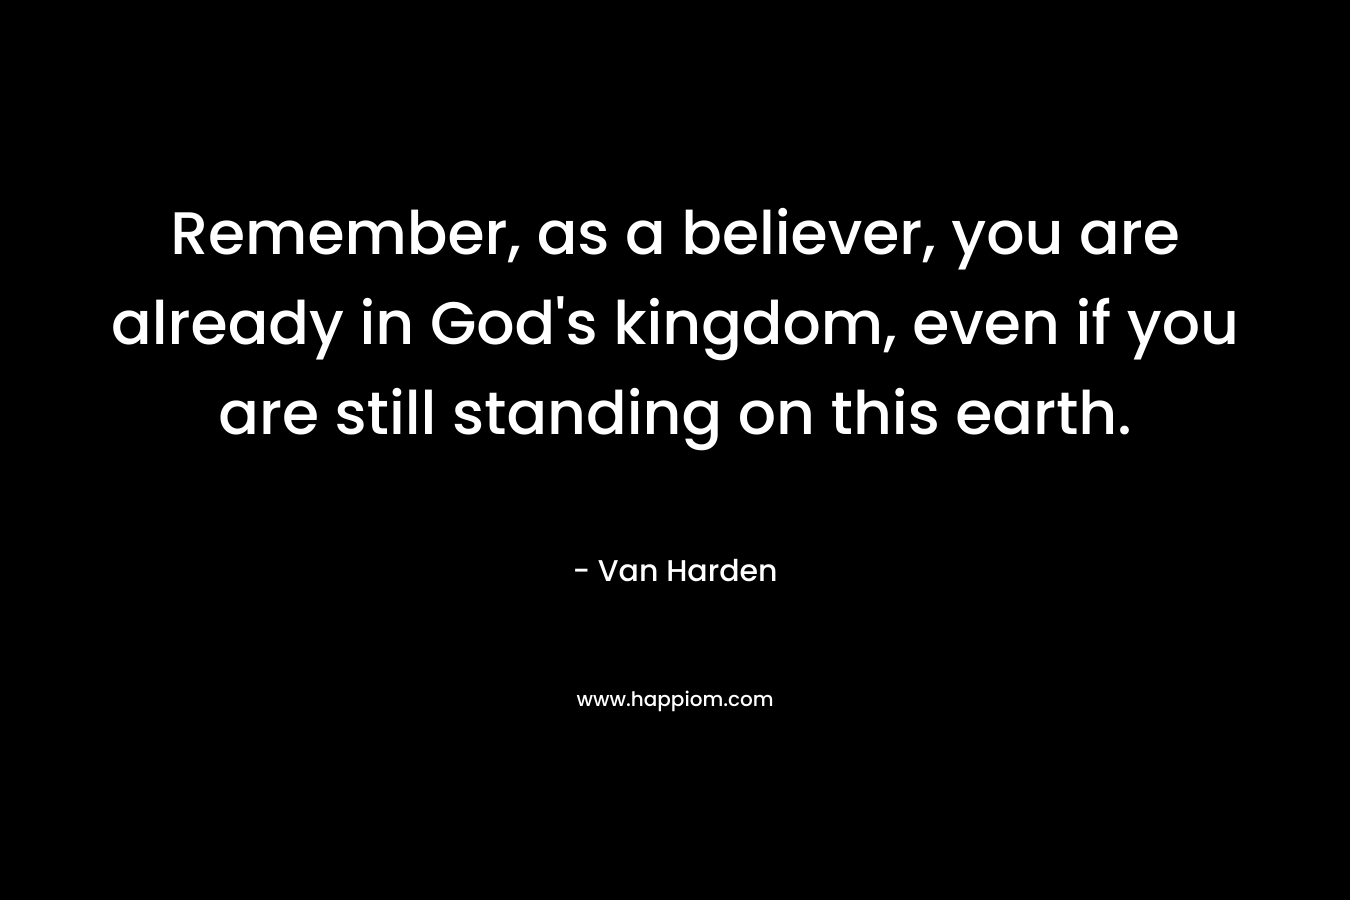 Remember, as a believer, you are already in God's kingdom, even if you are still standing on this earth.